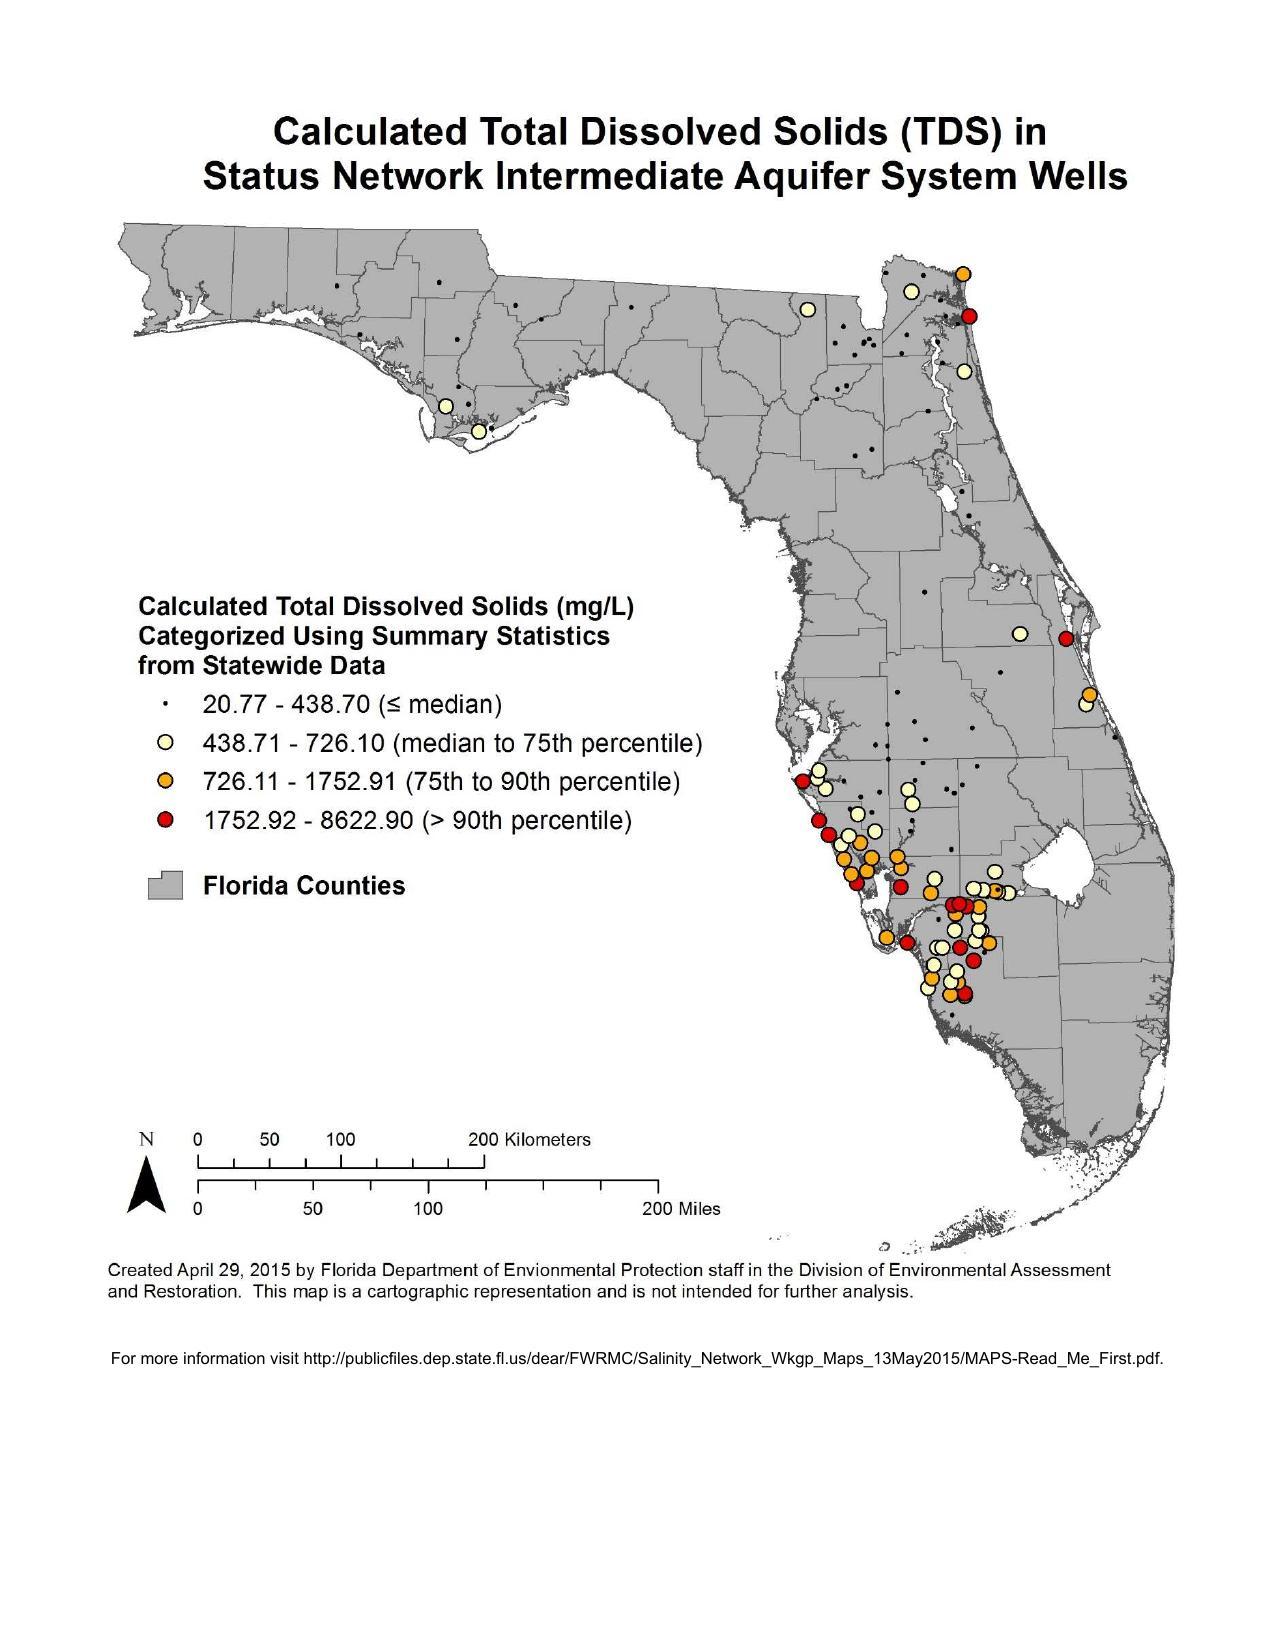 1275x1650 Calculated Total Dissolved Solids (TDS) in Status Network Intermediate Aquifer System Wells, in Florida Well Salinity Study, by FL-DEP, 13 July 2015